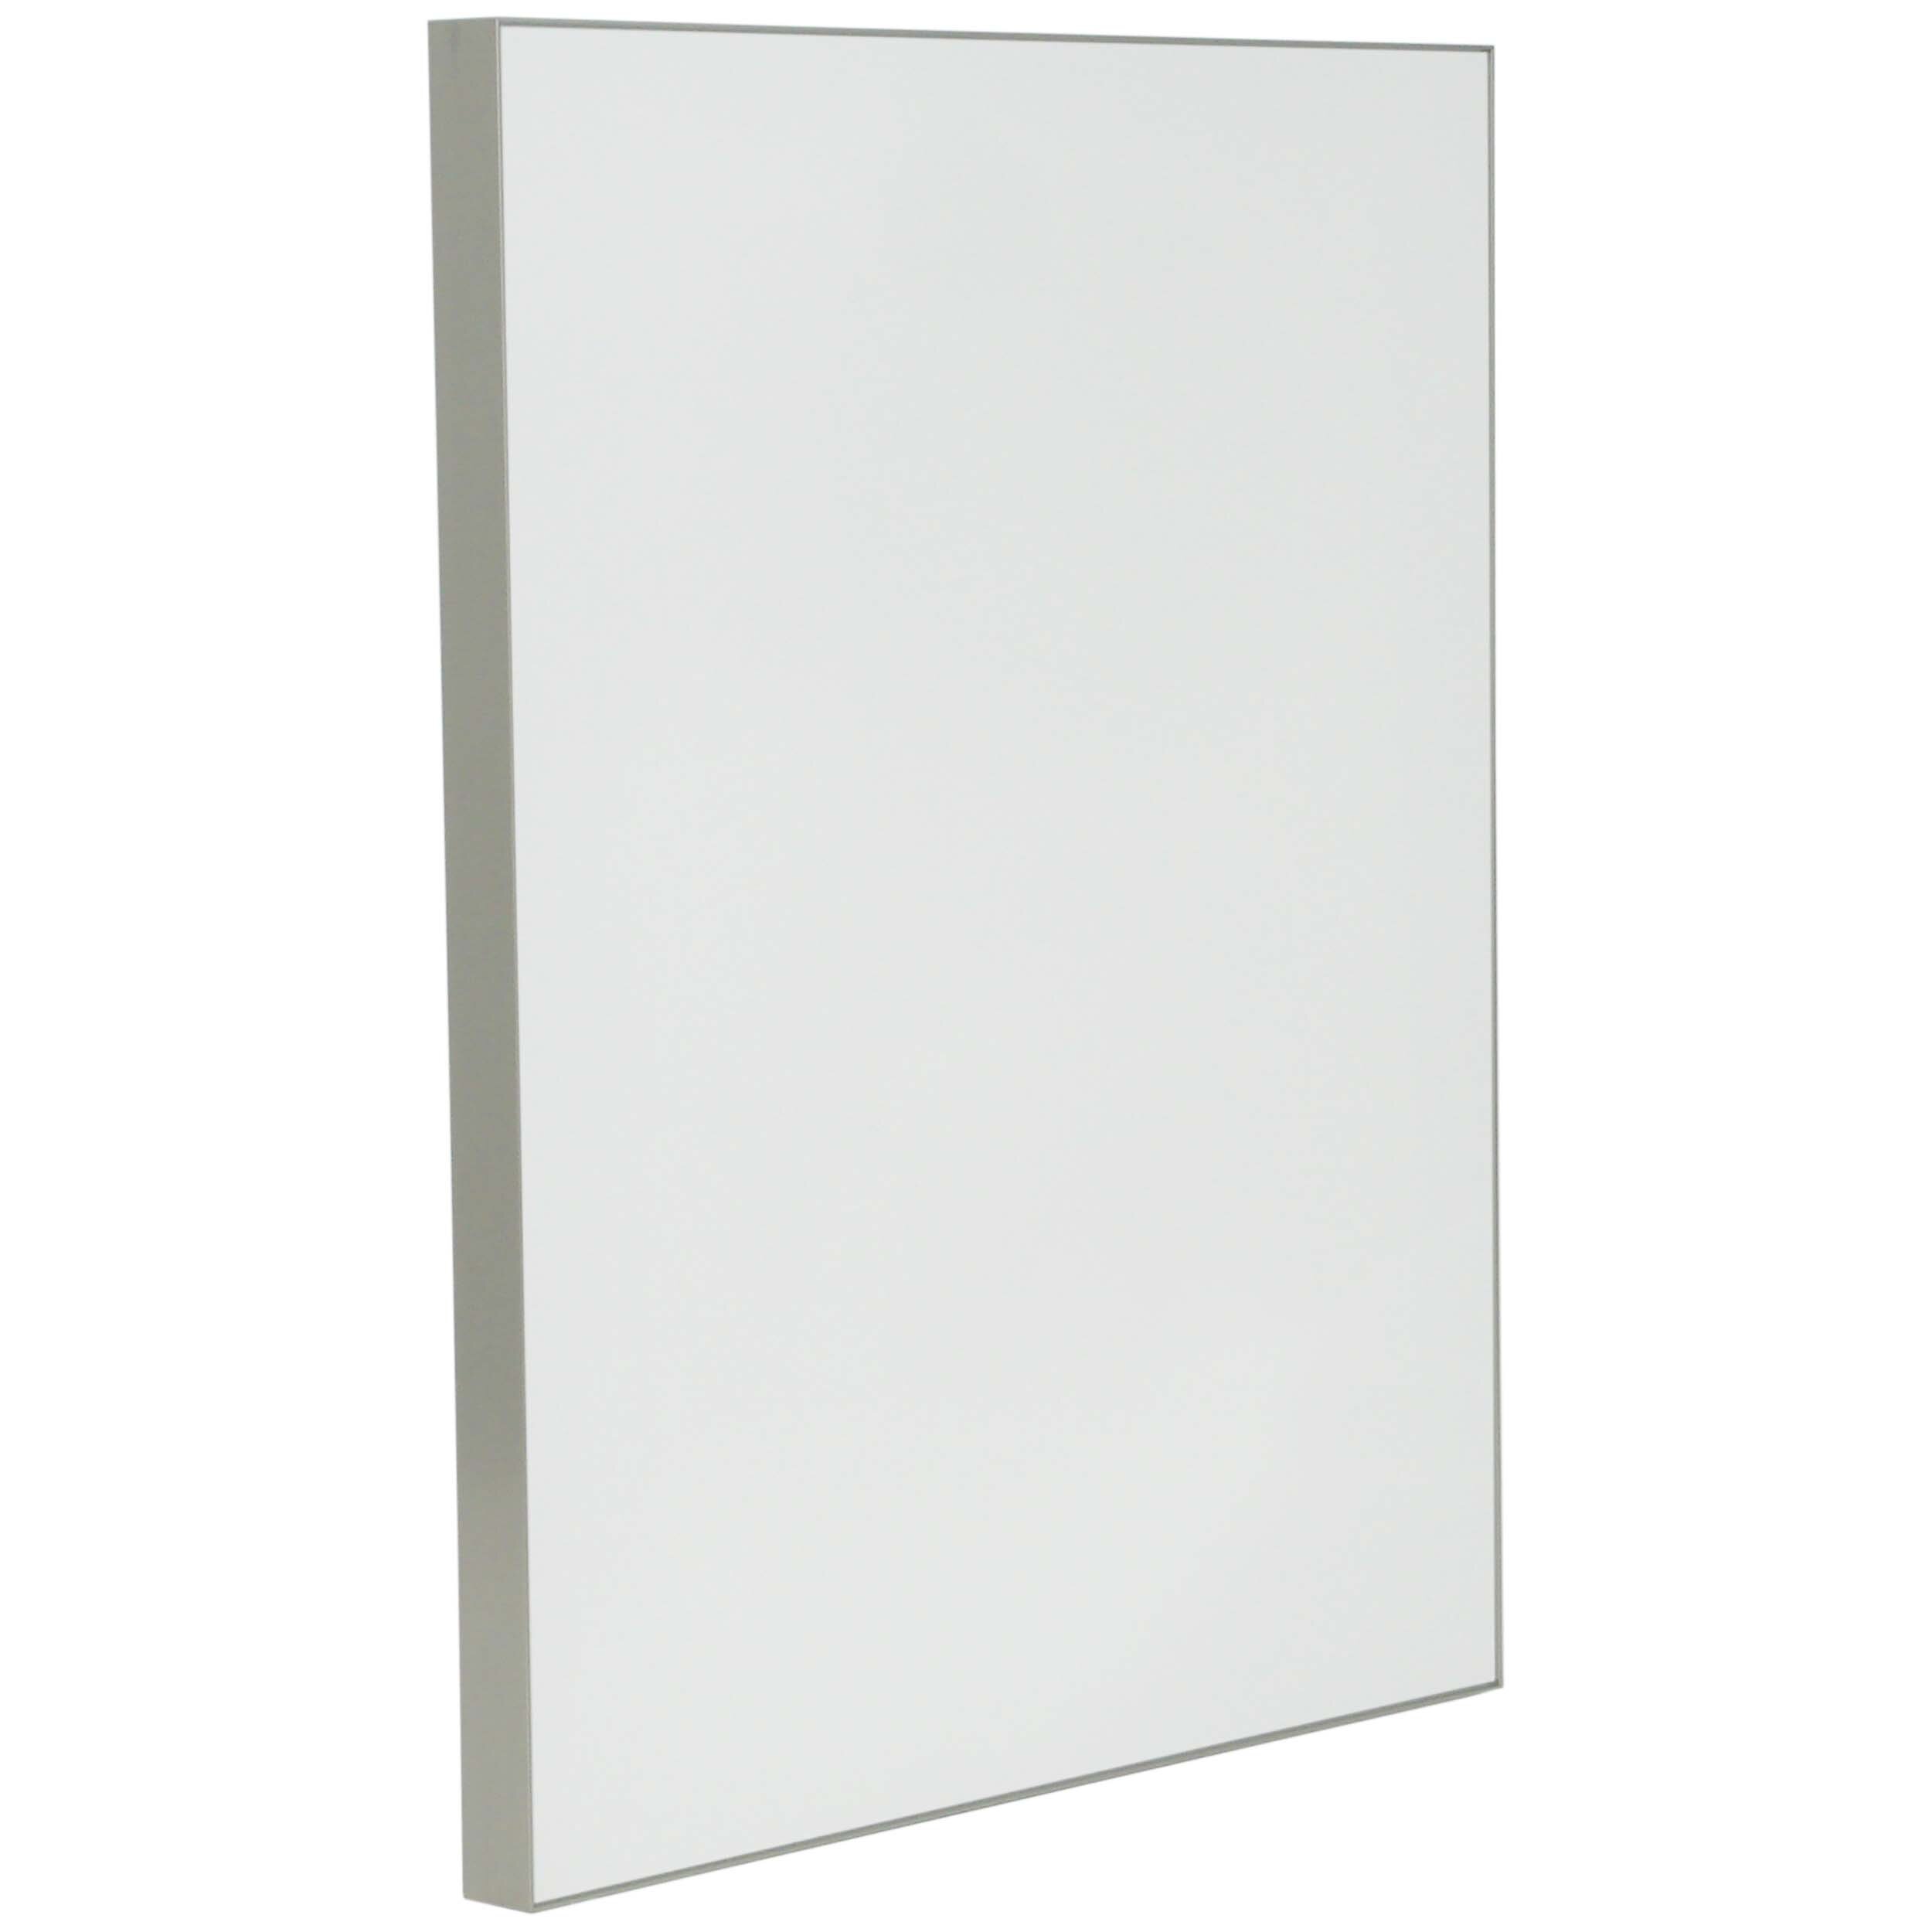 metal-and-glass-cabinet-door-af006s_whitegloss_iso.jpg